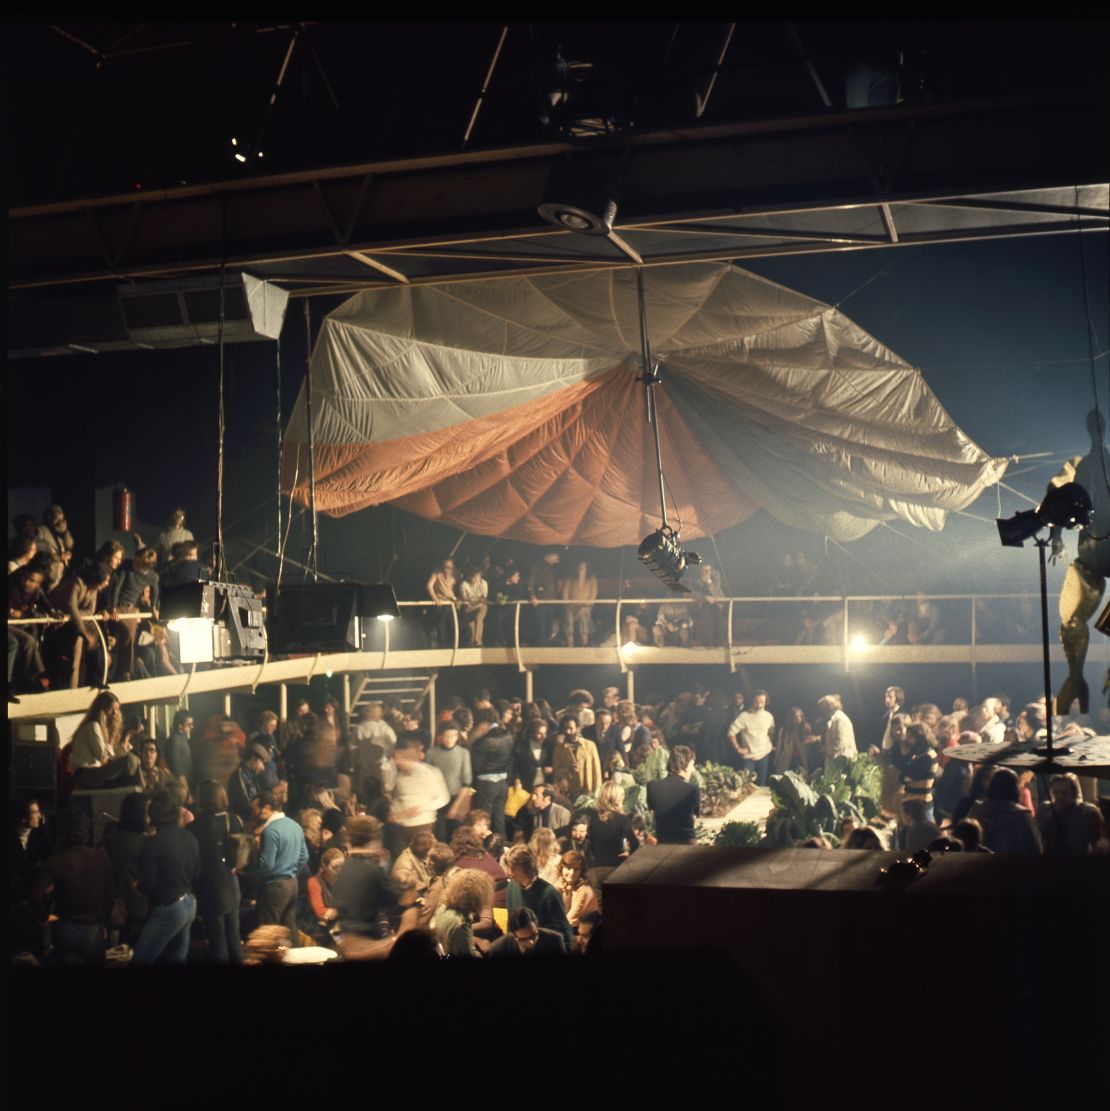 The nightclub Space Electronic in Florence, Italy, opened in 1969 on the site of an old engine repair shop. 